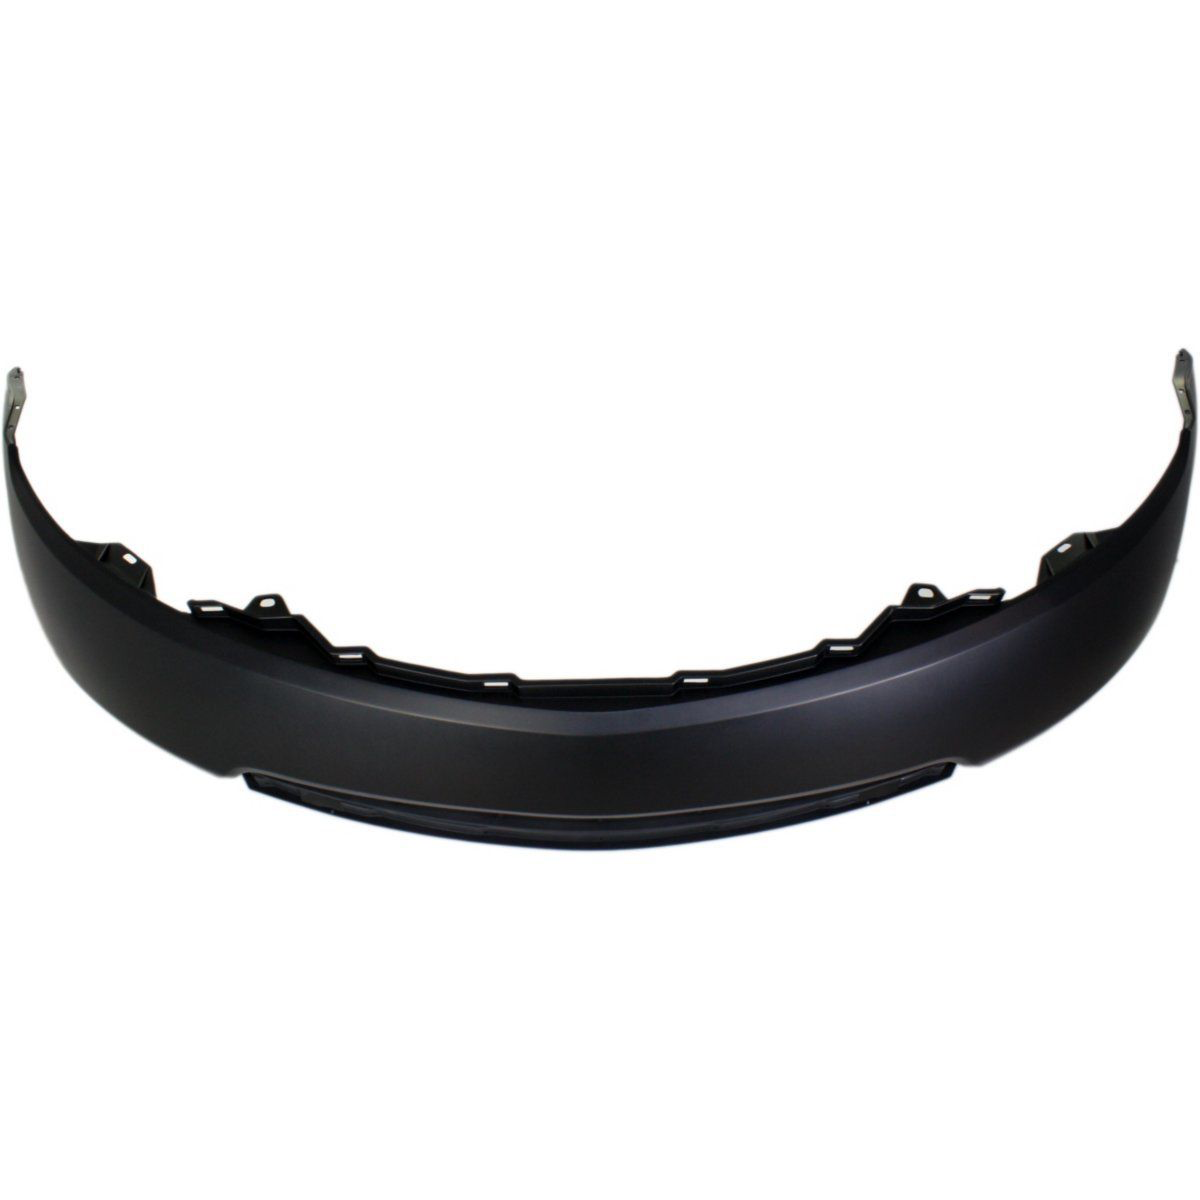 2006-2007 NISSAN MURANO Front Bumper Cover Includes mounting clips and screws Painted to Match